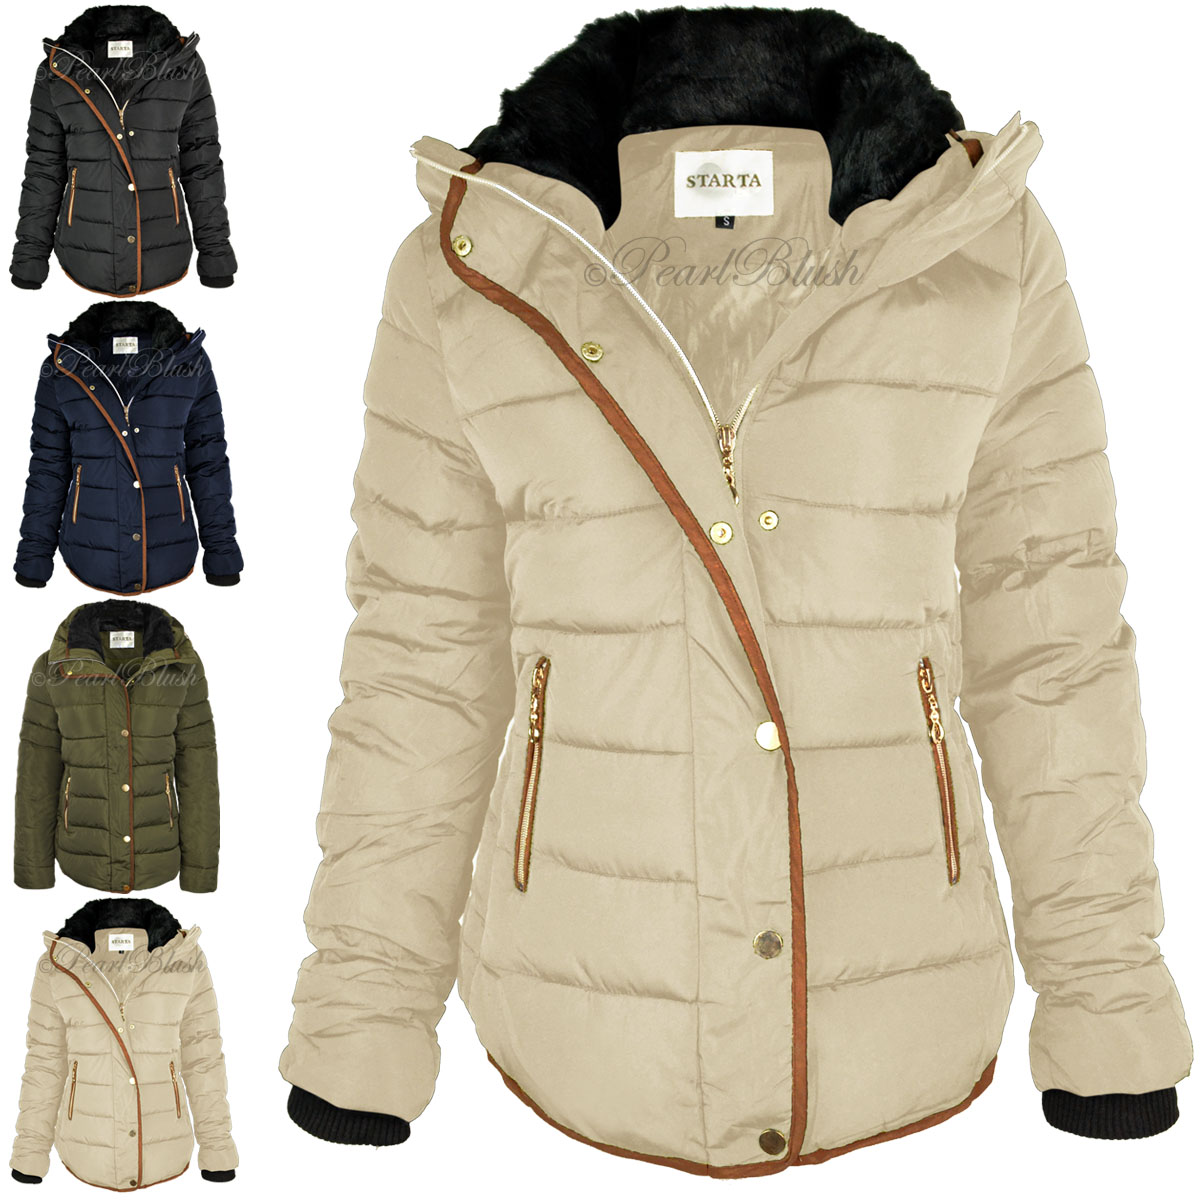 NEW WOMENS LADIES QUILTED WINTER COAT PUFFER FUR HOODED JACKET PARKA 4 COLOURS 